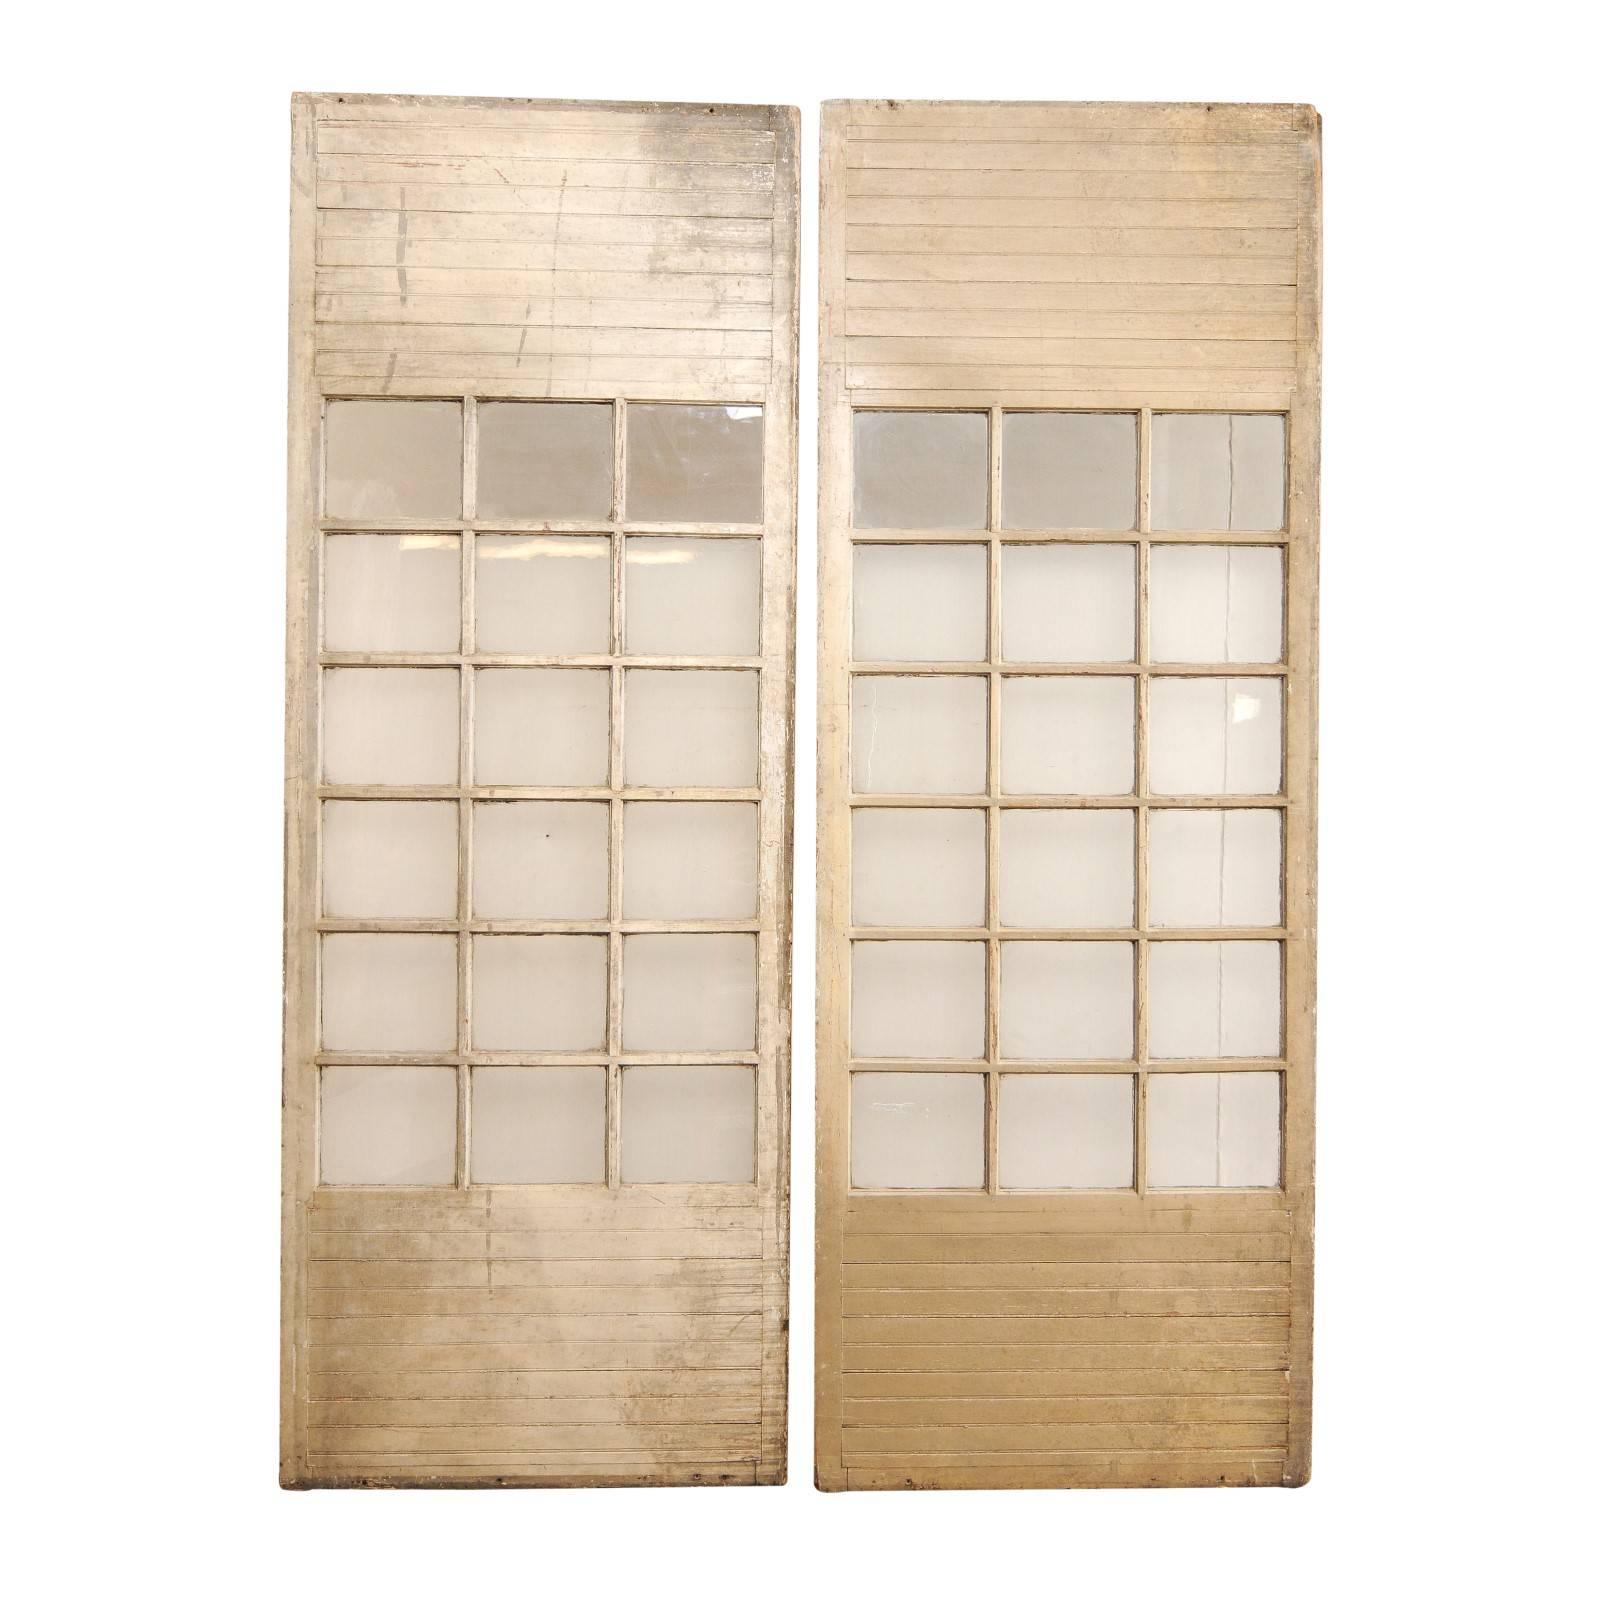 10 ft+ Tall French Pair of Glass Paneled Wood Doors from the Early 20th C. For Sale